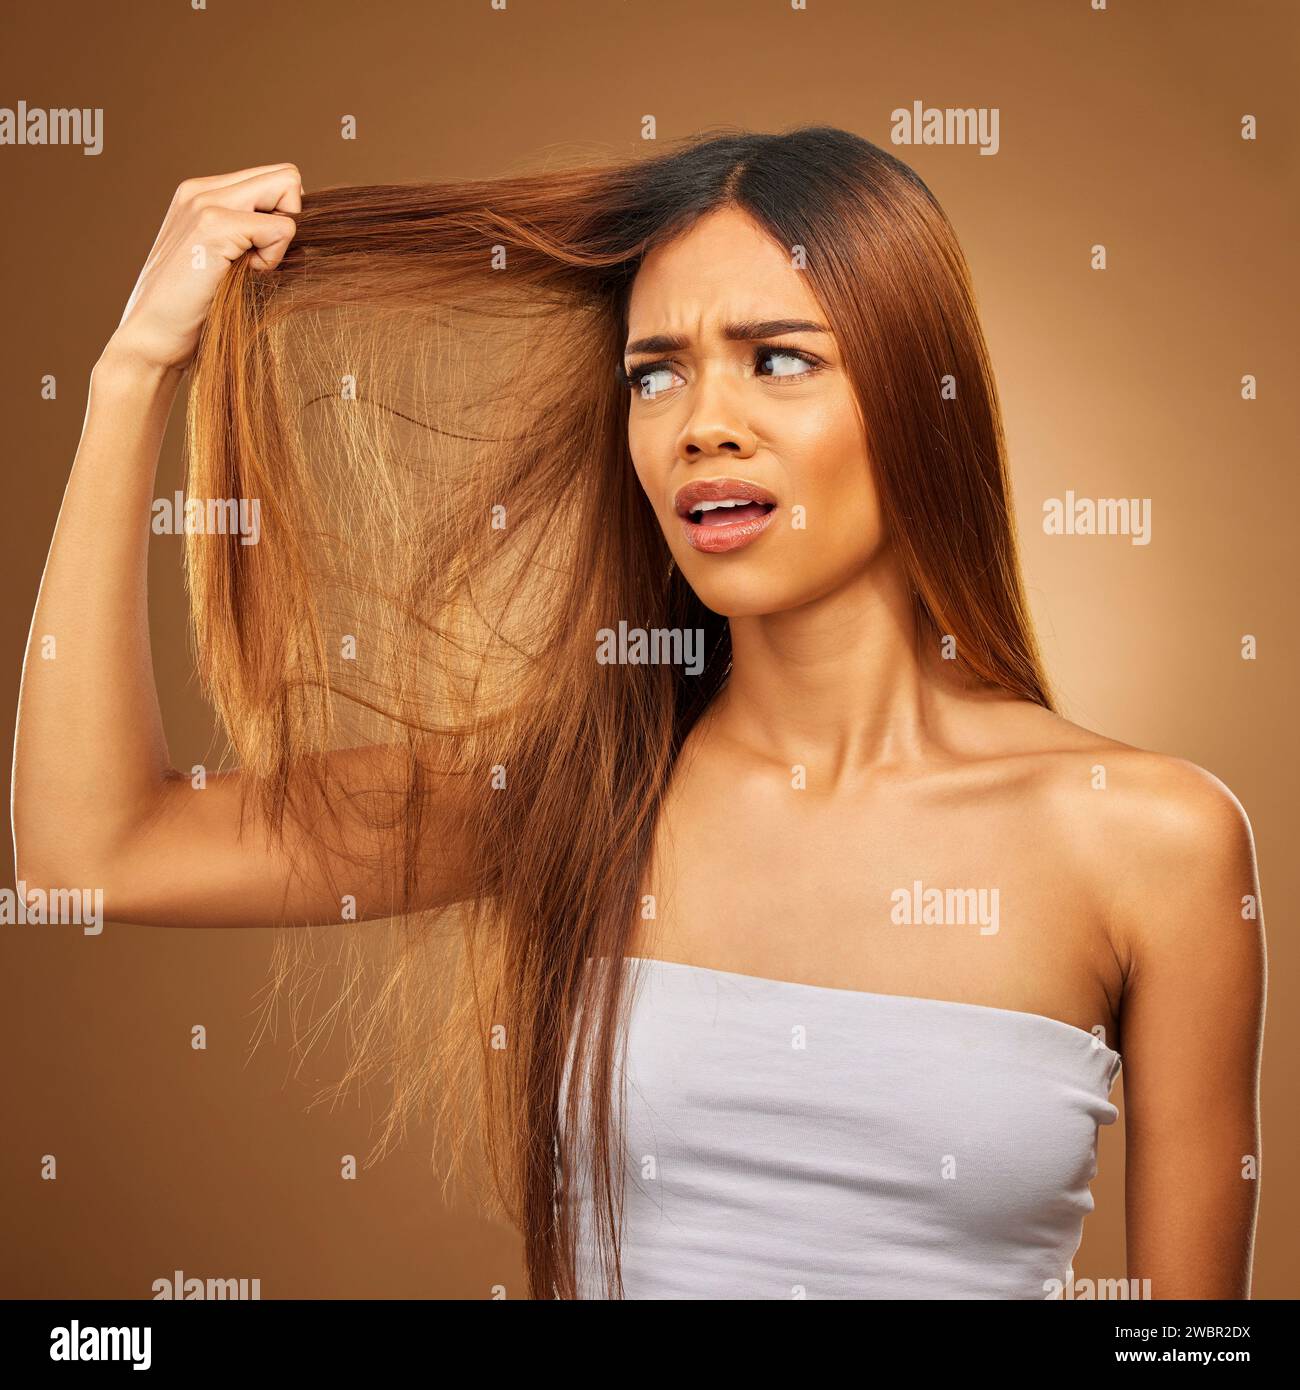 Hair, problem and woman in studio frustrated with hair loss, split ends or damage against a brown background. Haircare, crisis and girl model with Stock Photo